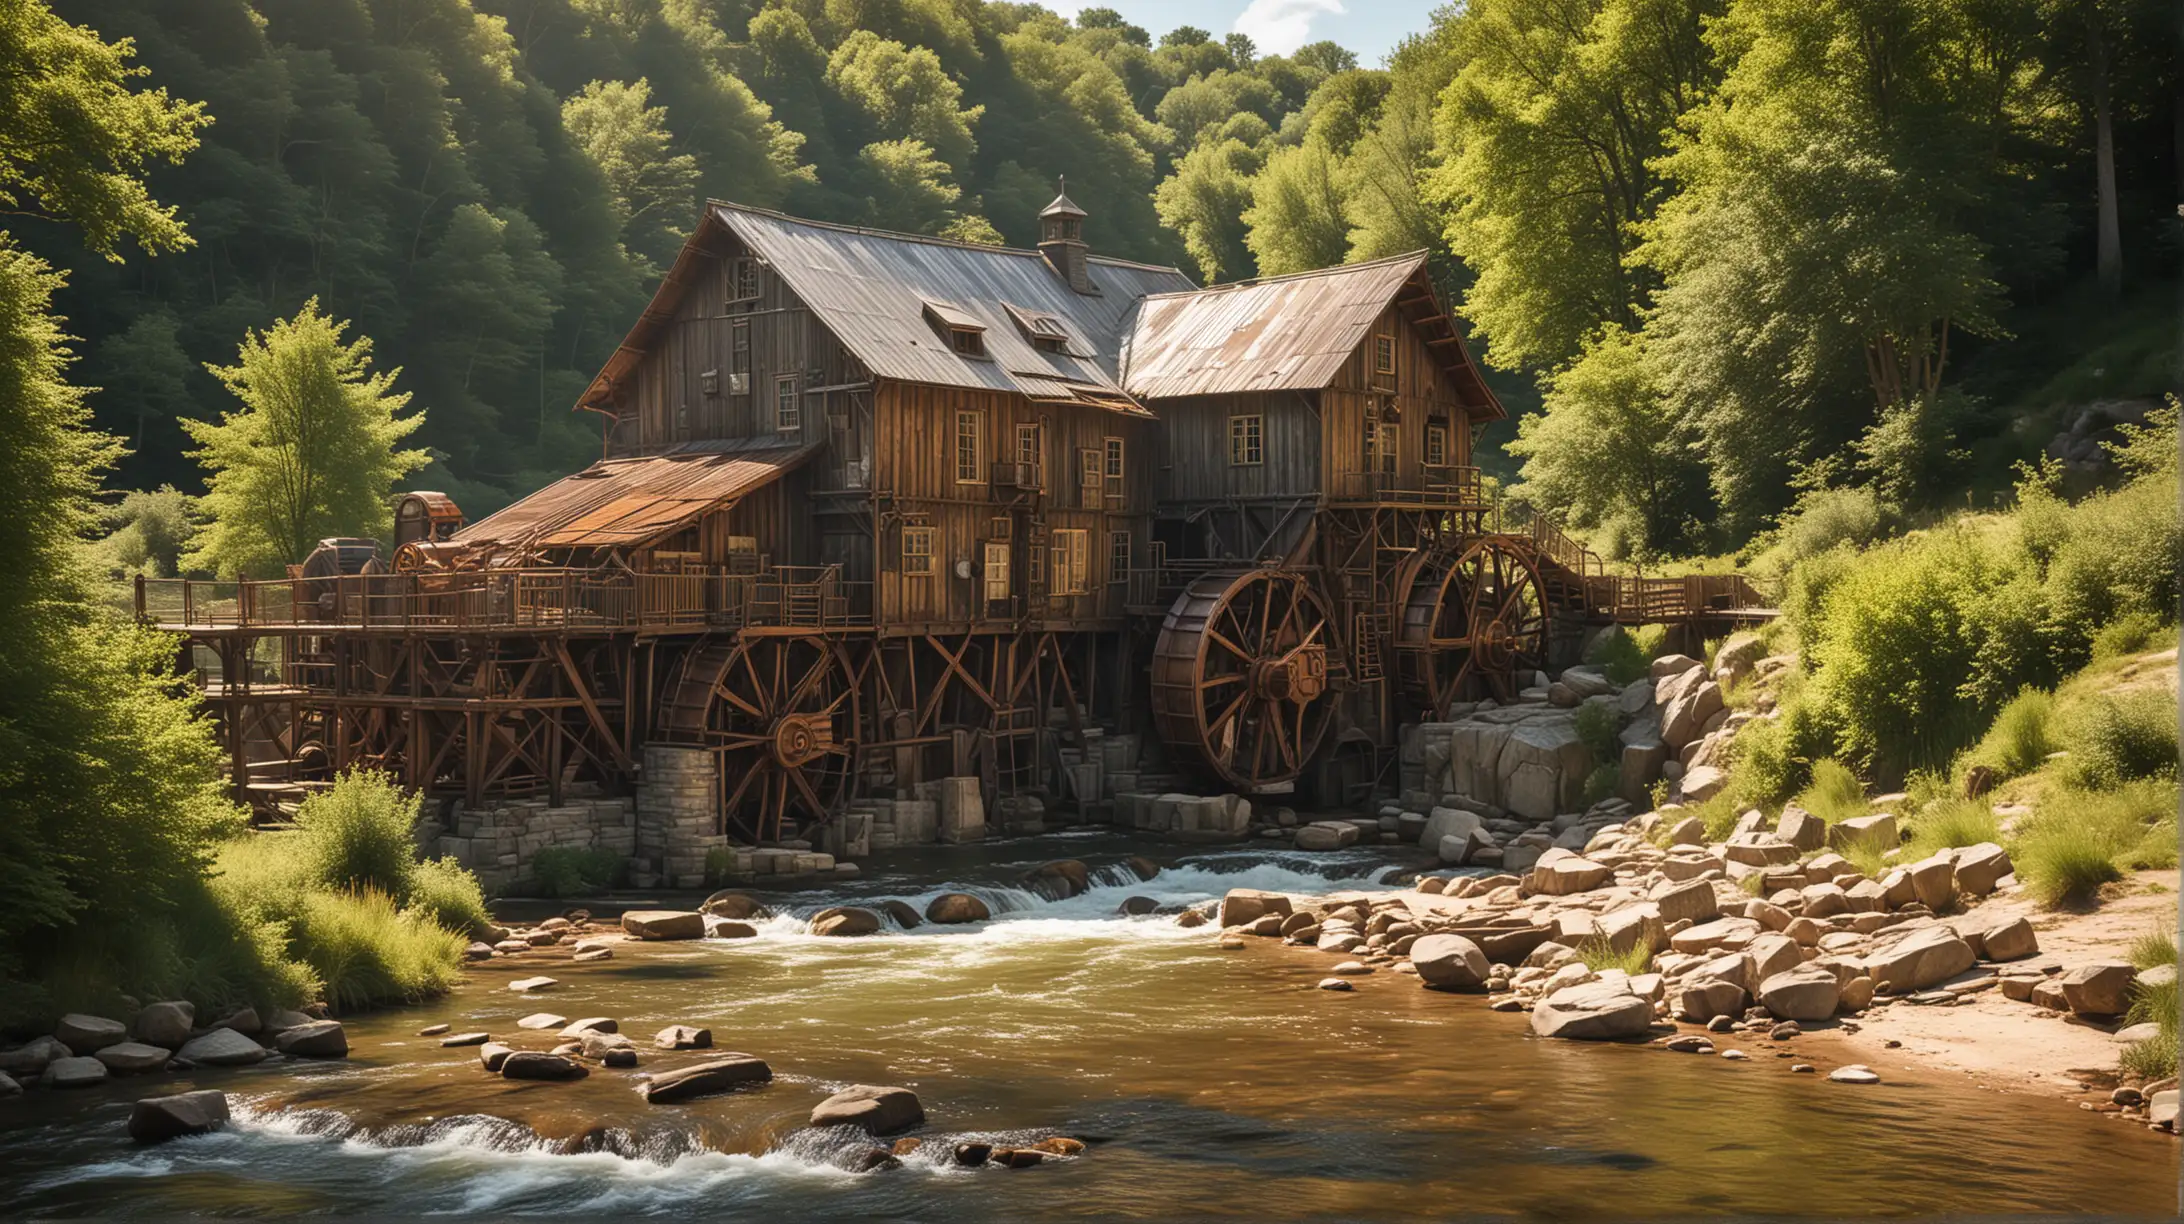 a steampunk water mill by a troubled river, copper, brass, glass, wood, sunny, distant view